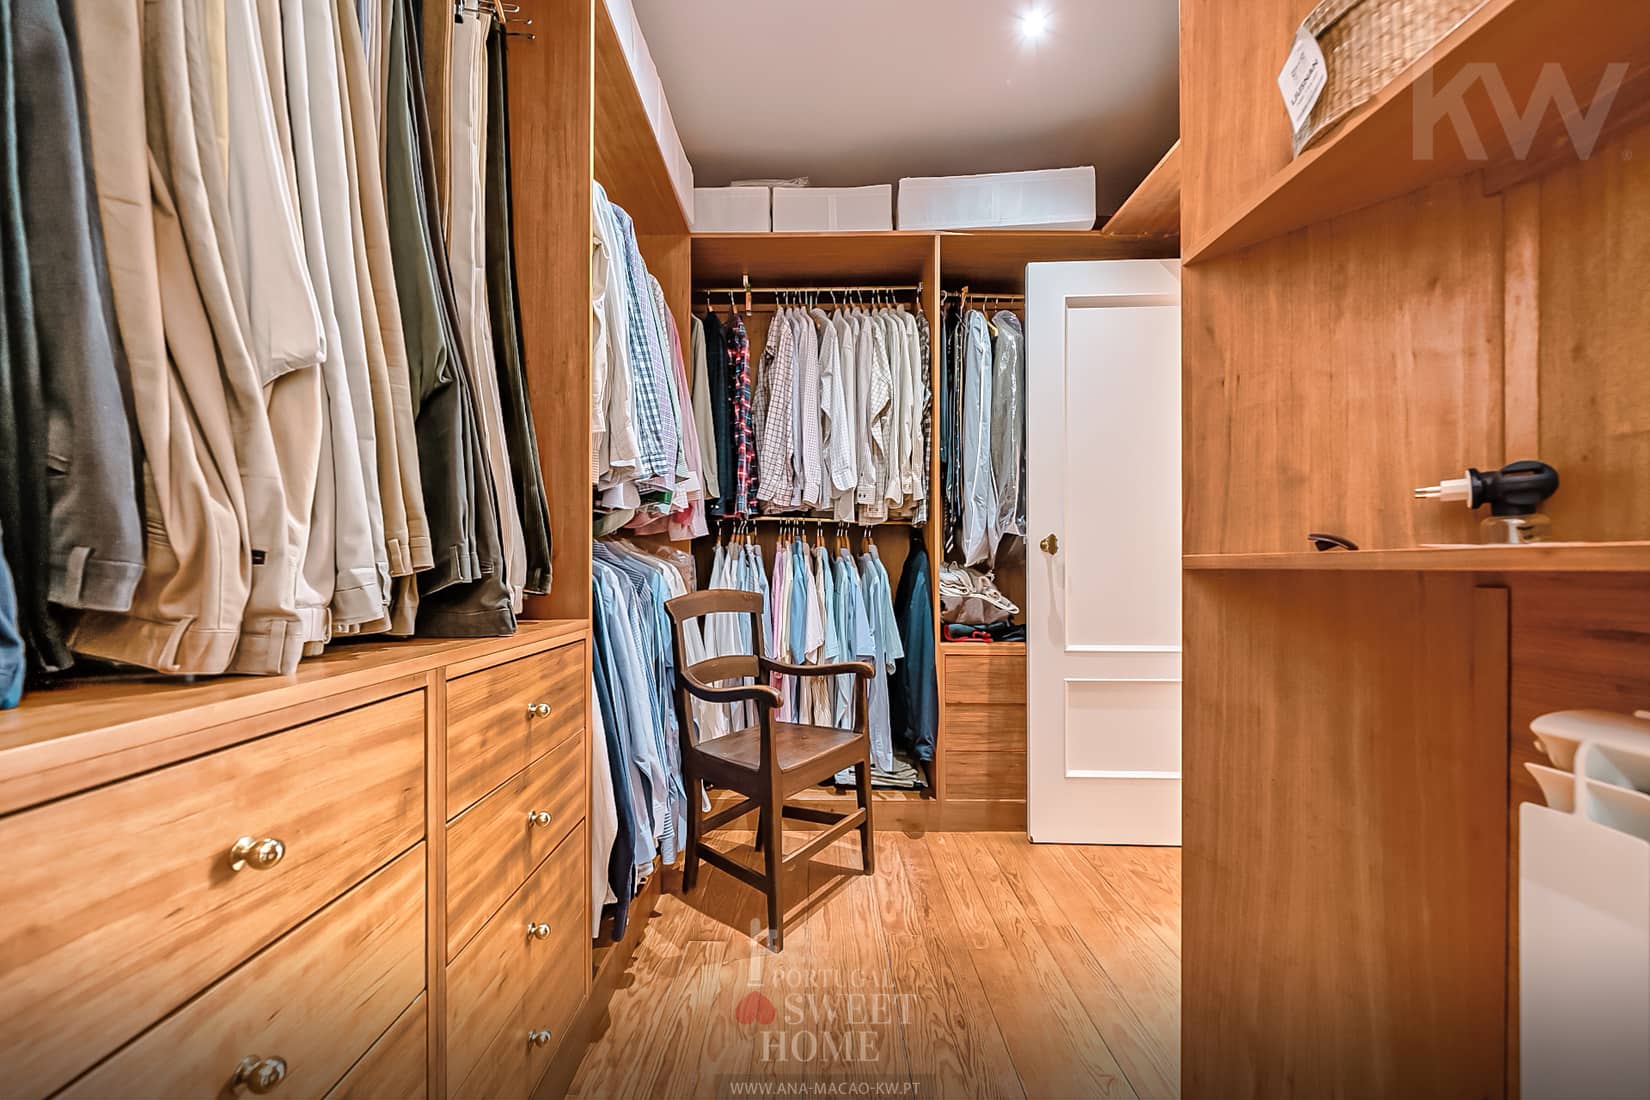 One of the master suite's closets (6.5 m²)